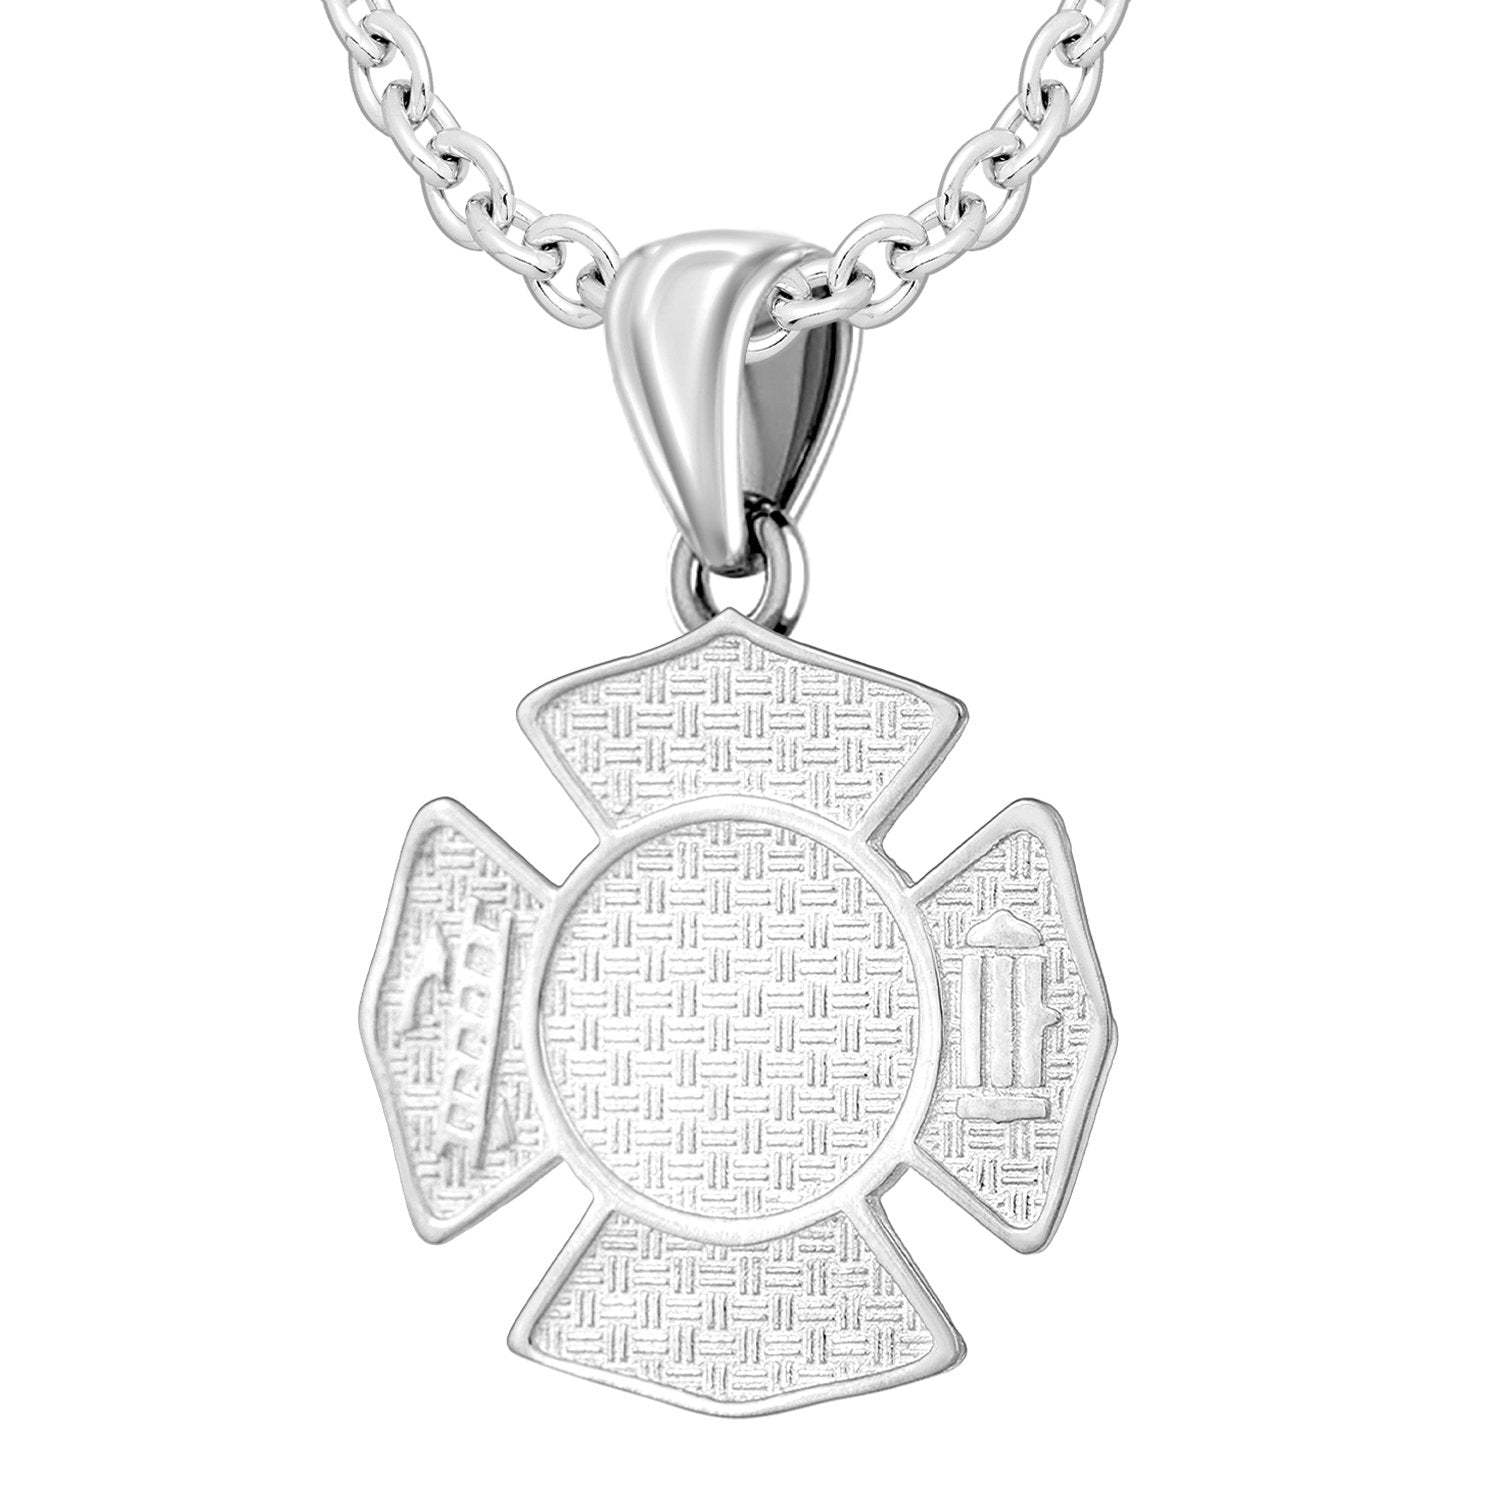 Firefighter Pendant of 26mm Length - 2.5mm Cable Chain